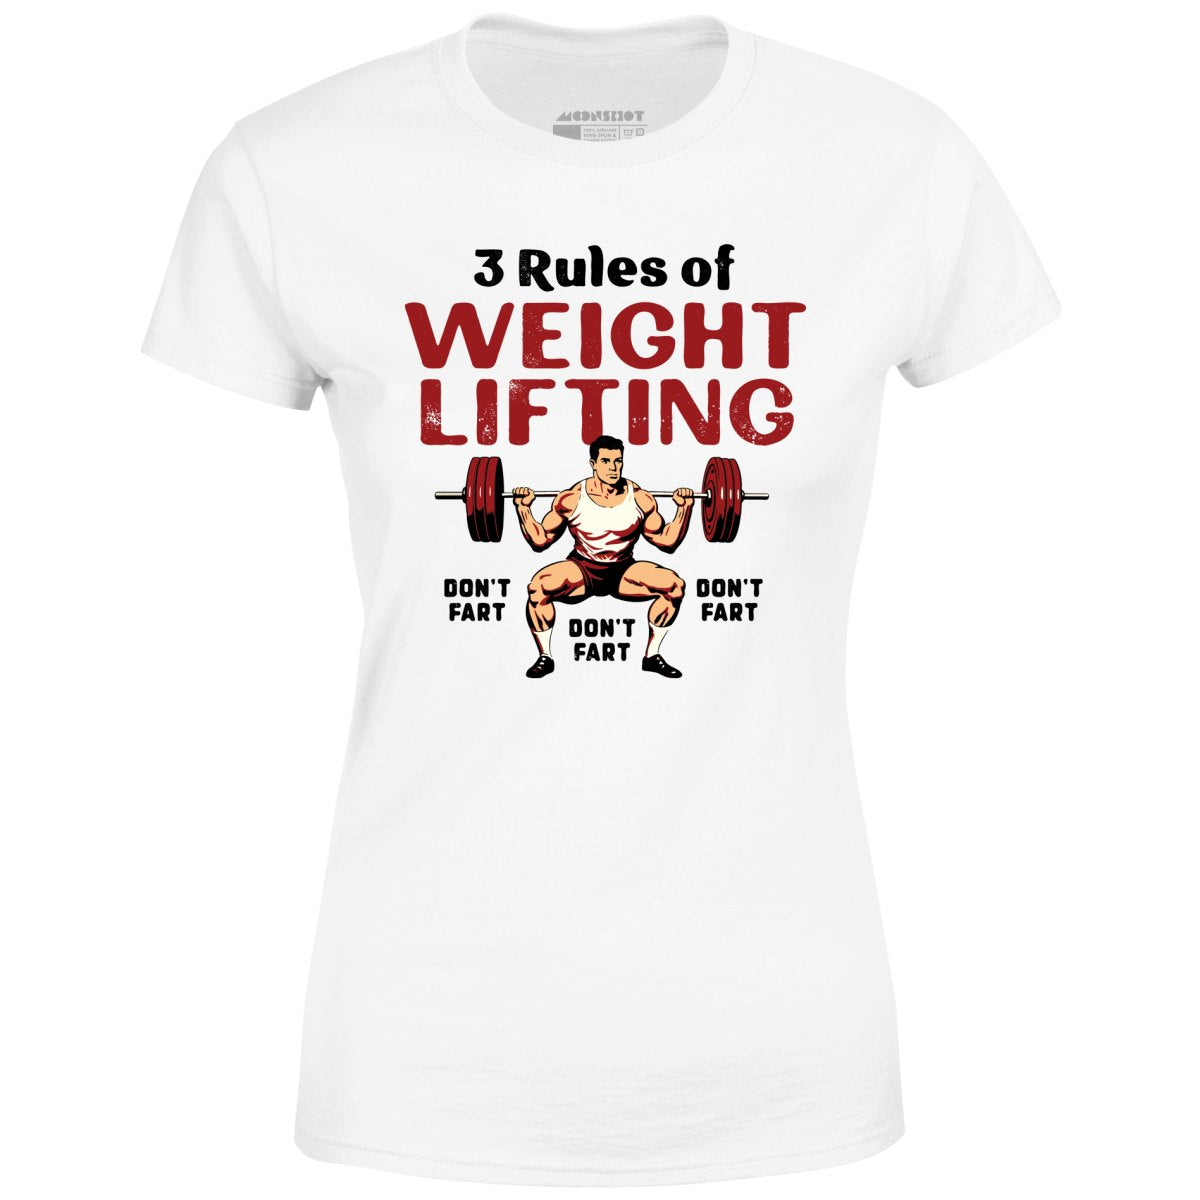 3 Rules of Weightlifting - Women's T-Shirt